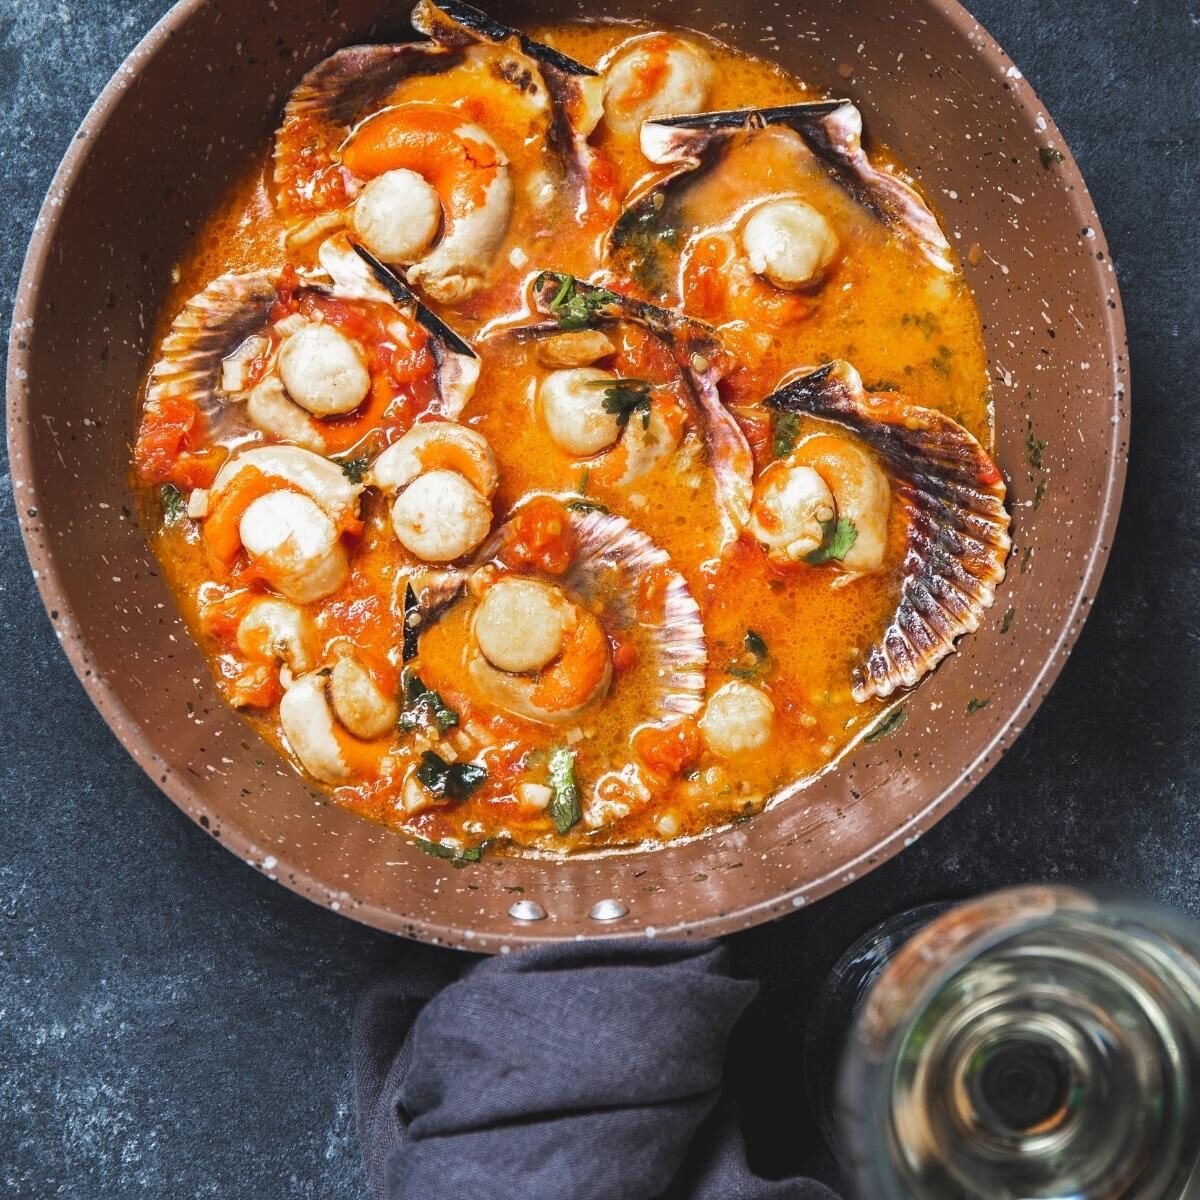 Deep red curry surrounding white round scallops sitting on their half shell in a brown bowl. There is a glass of white wine beside on the dark grey table.